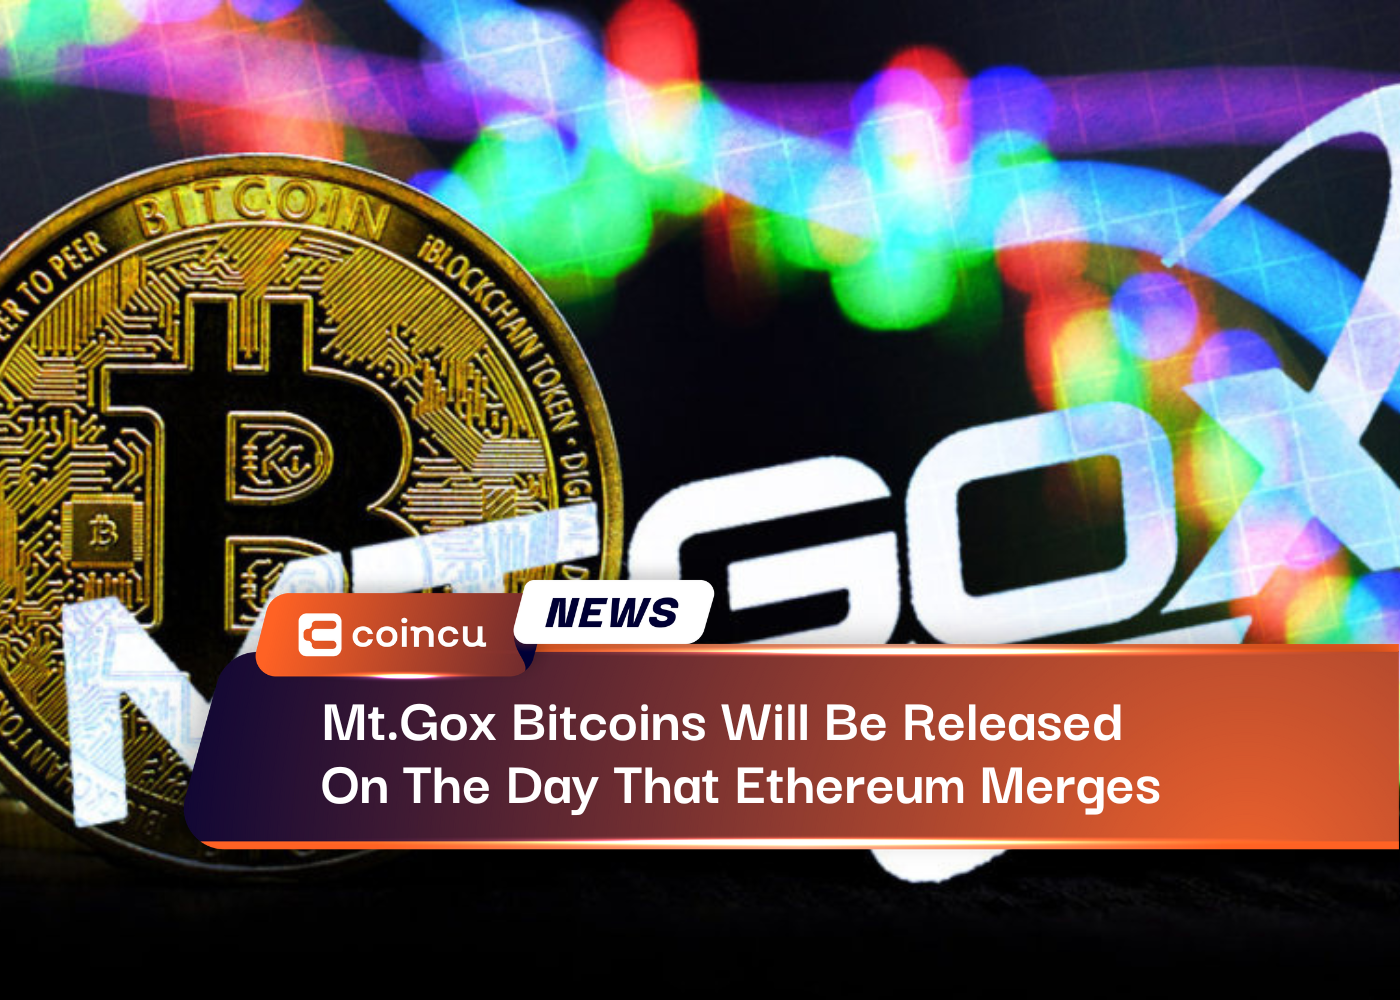 Mt.Gox Bitcoins Will Be Released